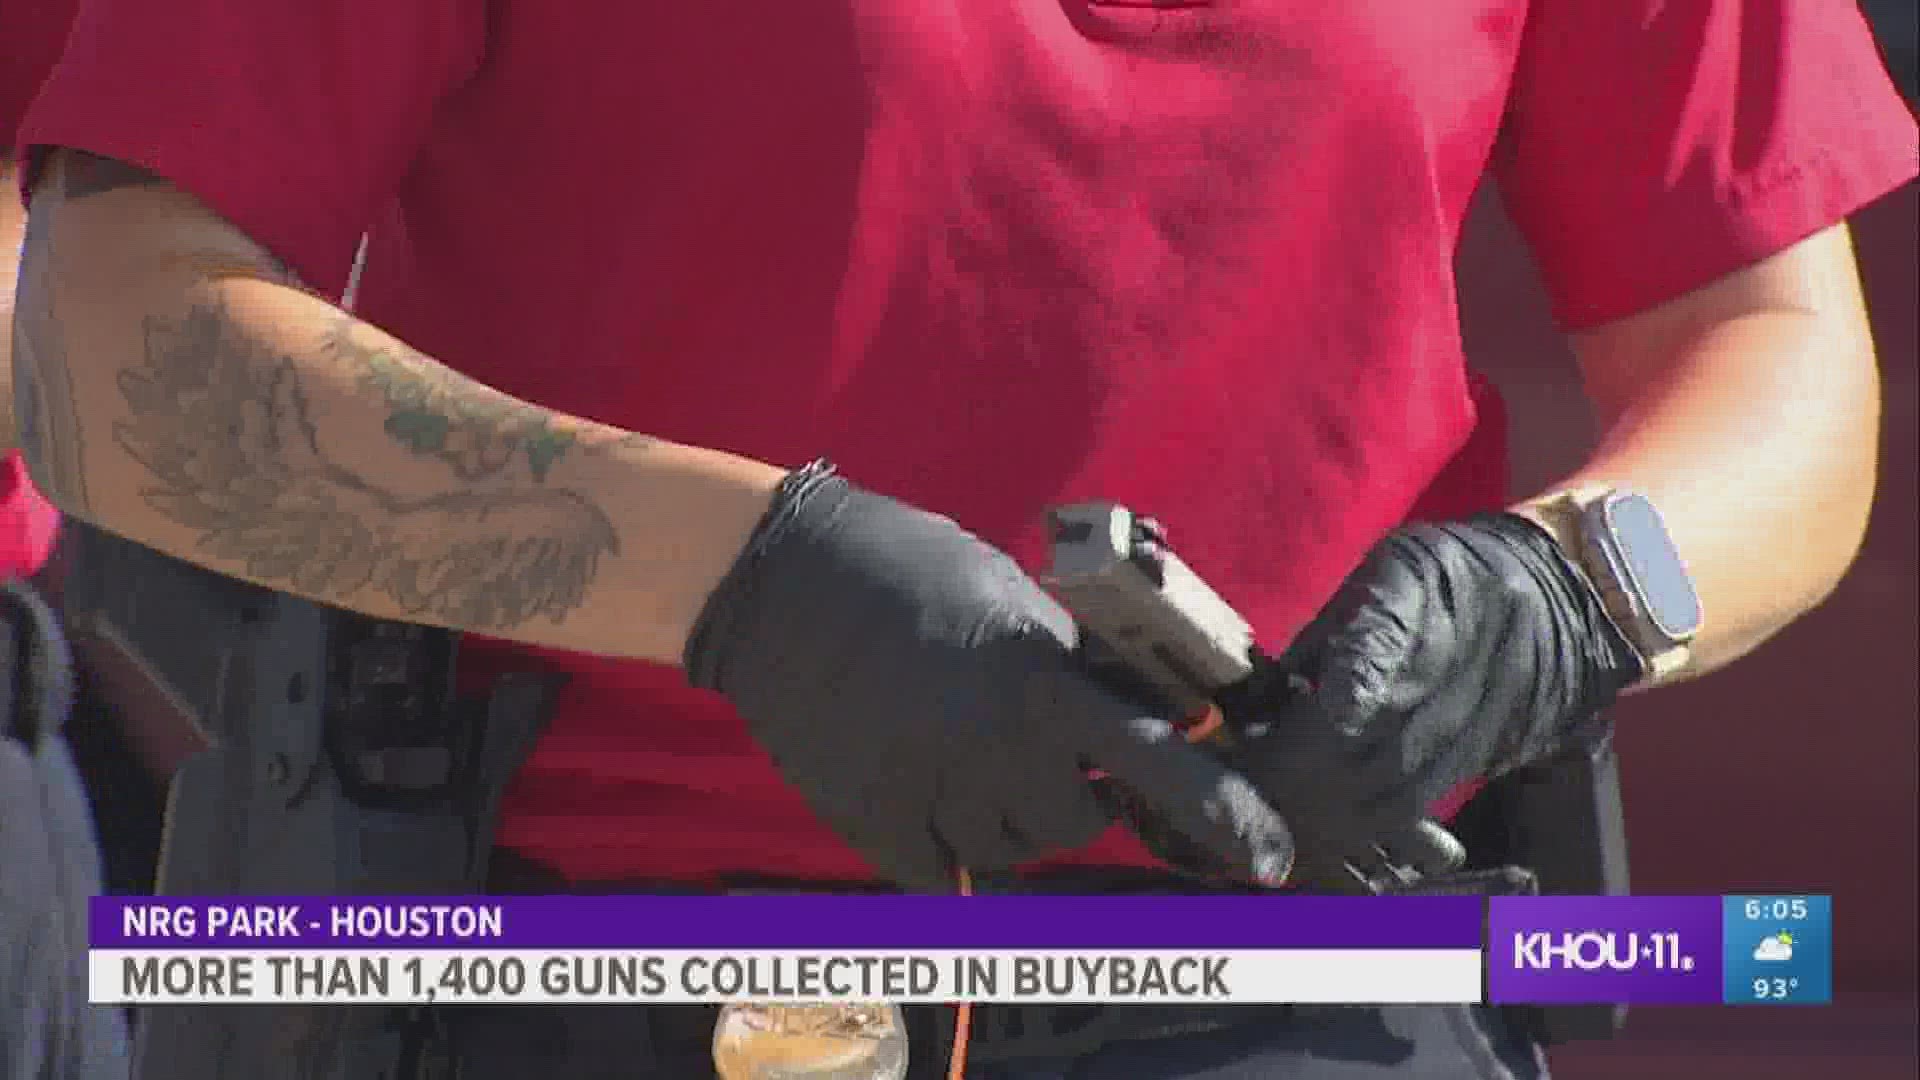 More than 1,400 guns were turned in, including 490 semi-automatic handguns and 188 semi-automatic rifles.